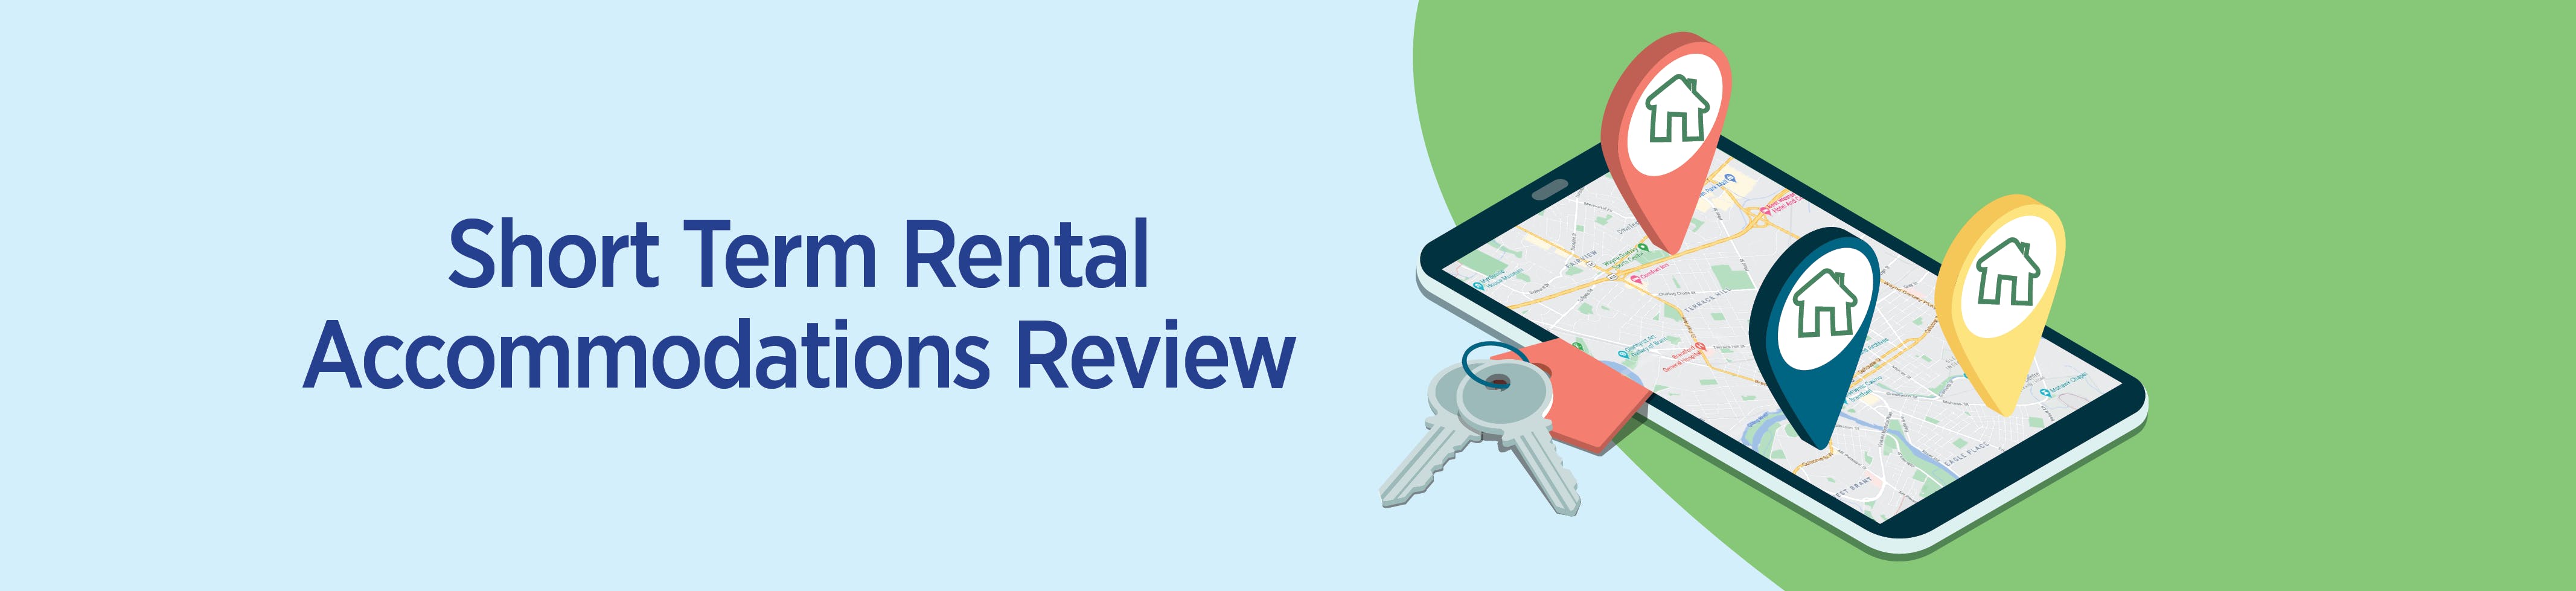 Short Term Rental Accommodations Review